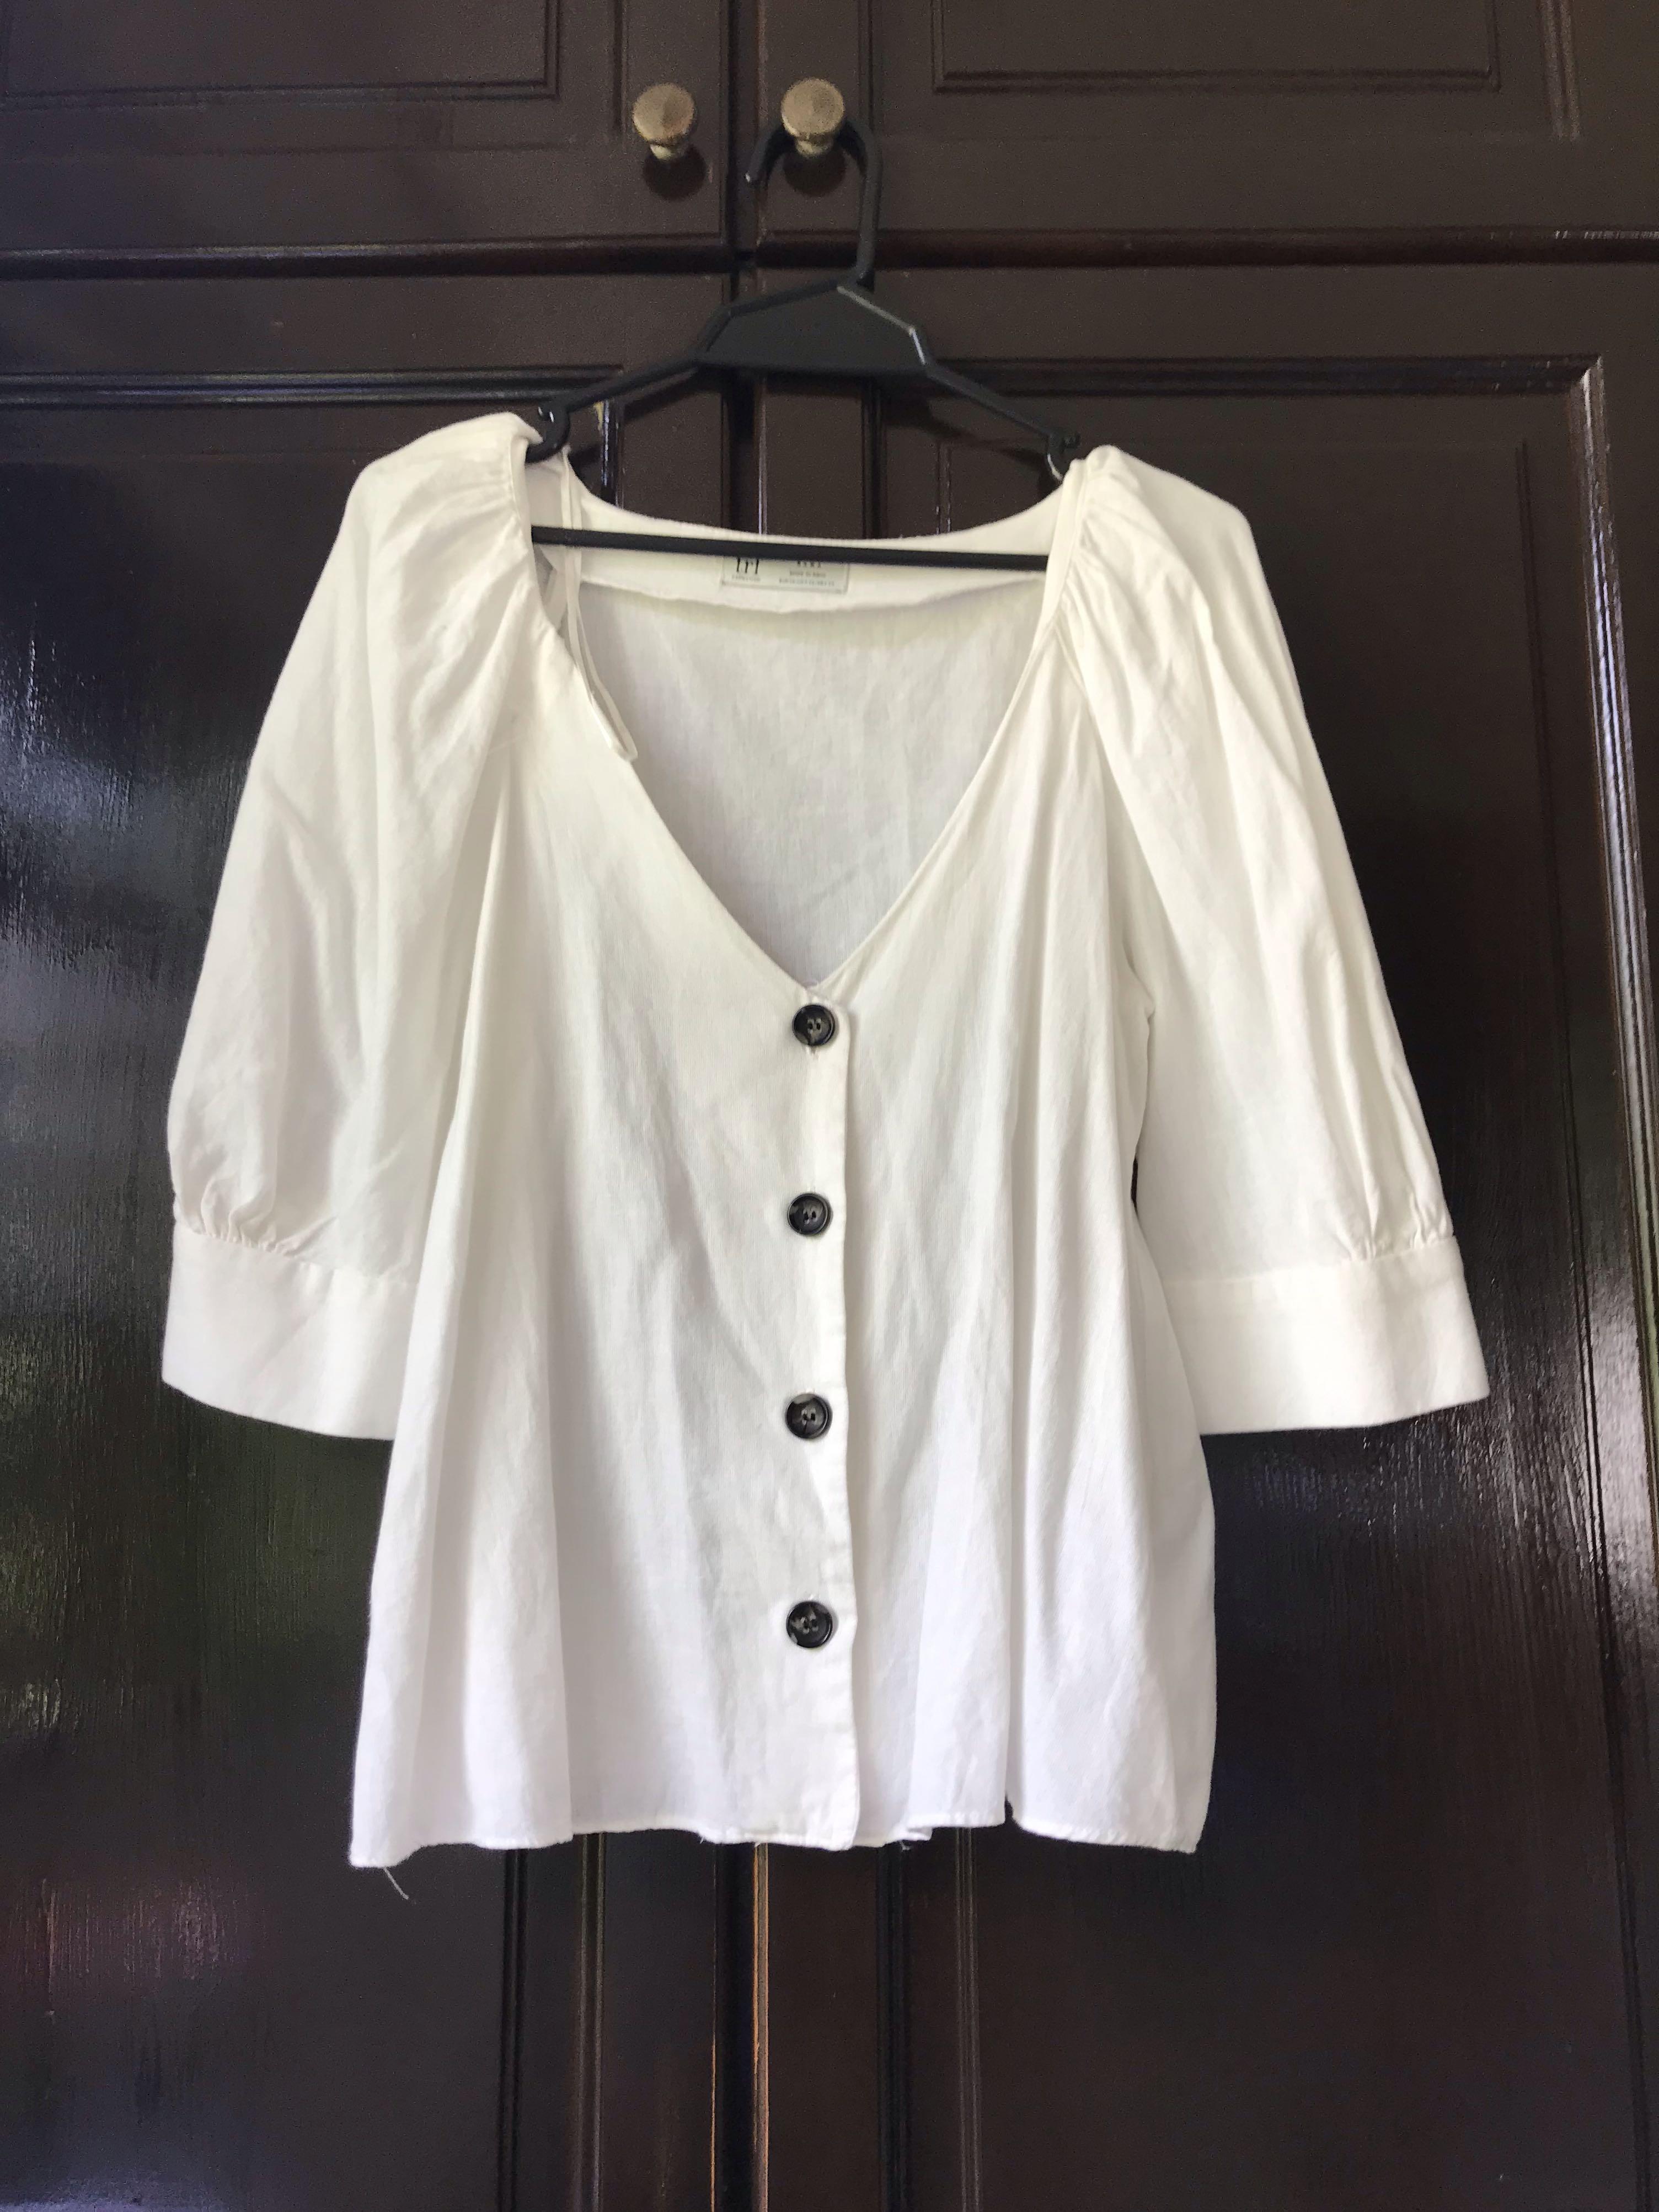 zara white top with buttons